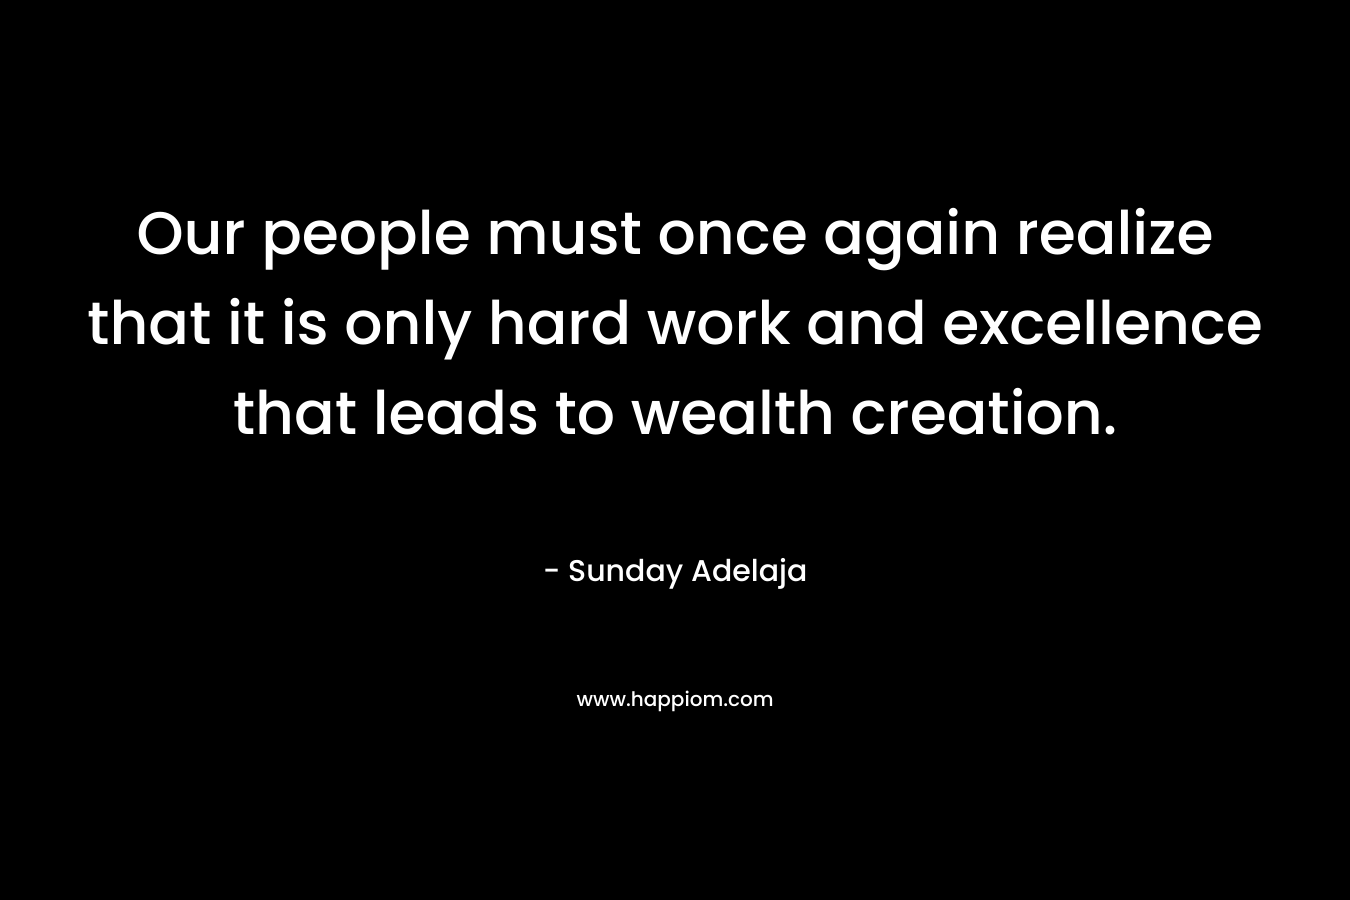 Our people must once again realize that it is only hard work and excellence that leads to wealth creation.